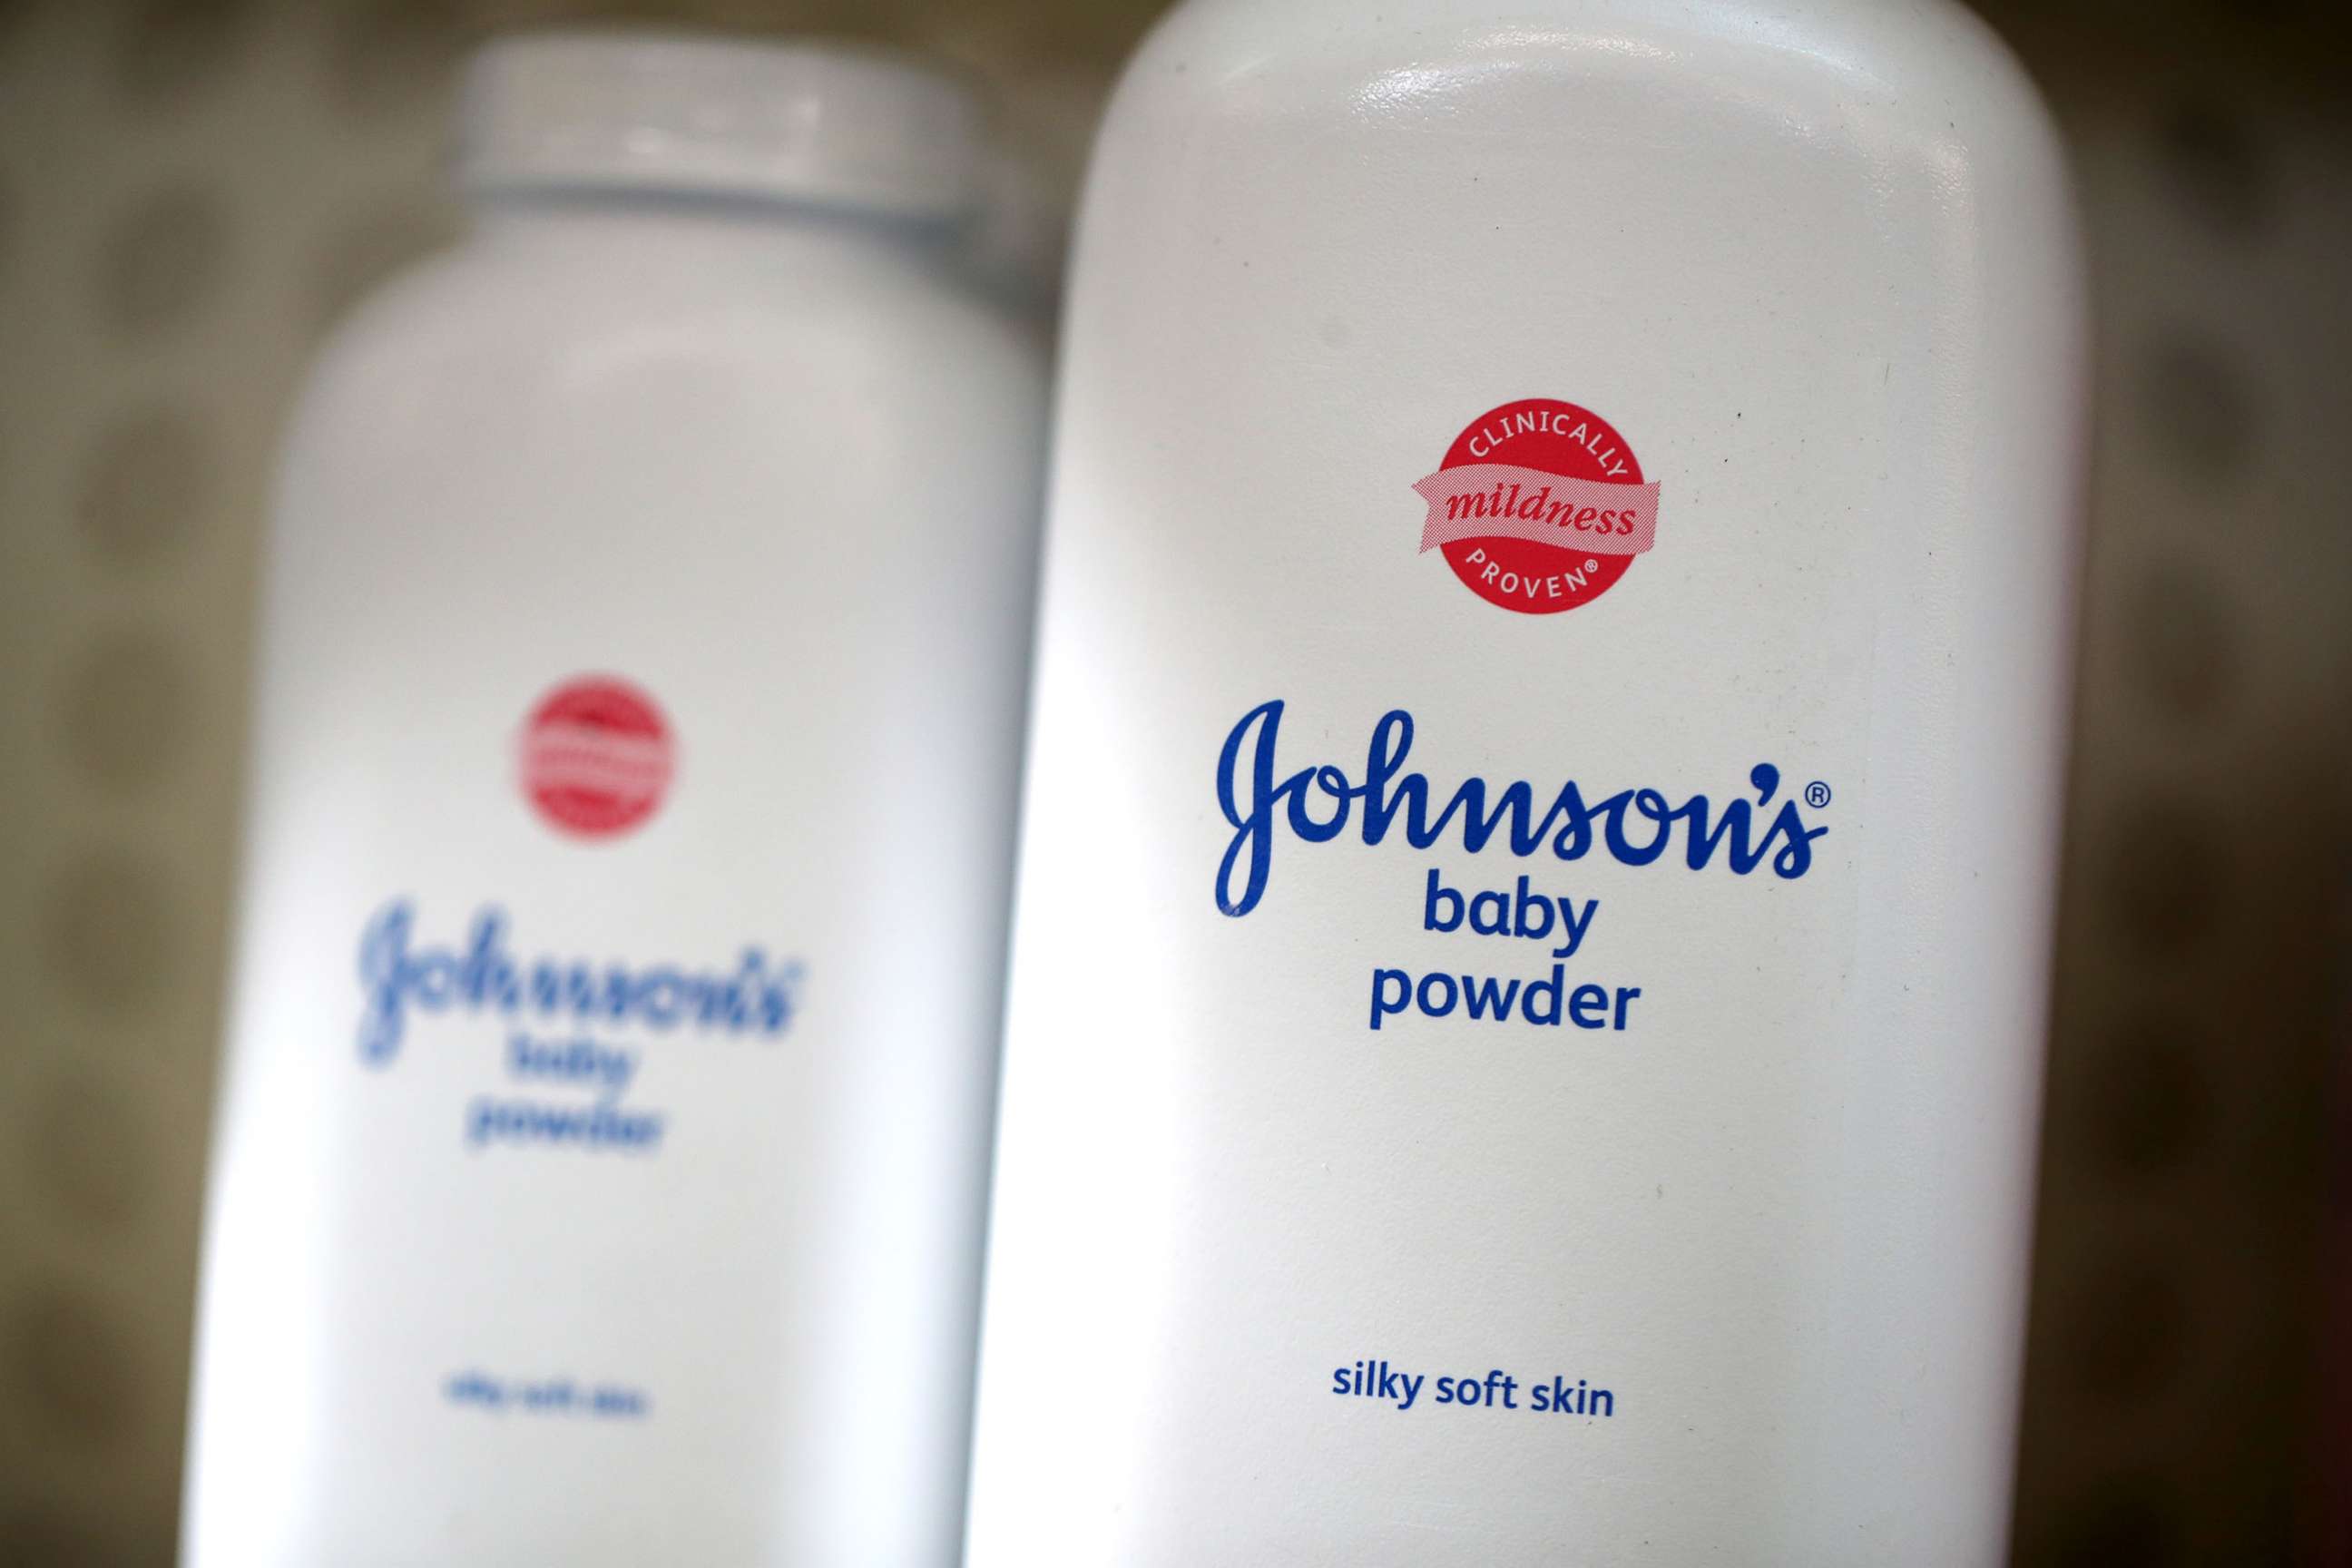 PHOTO: Containers of Johnson's baby powder made by Johnson and Johnson sits on a shelf at a drug store, Oct. 18, 2019, in San Anselmo, Calif.